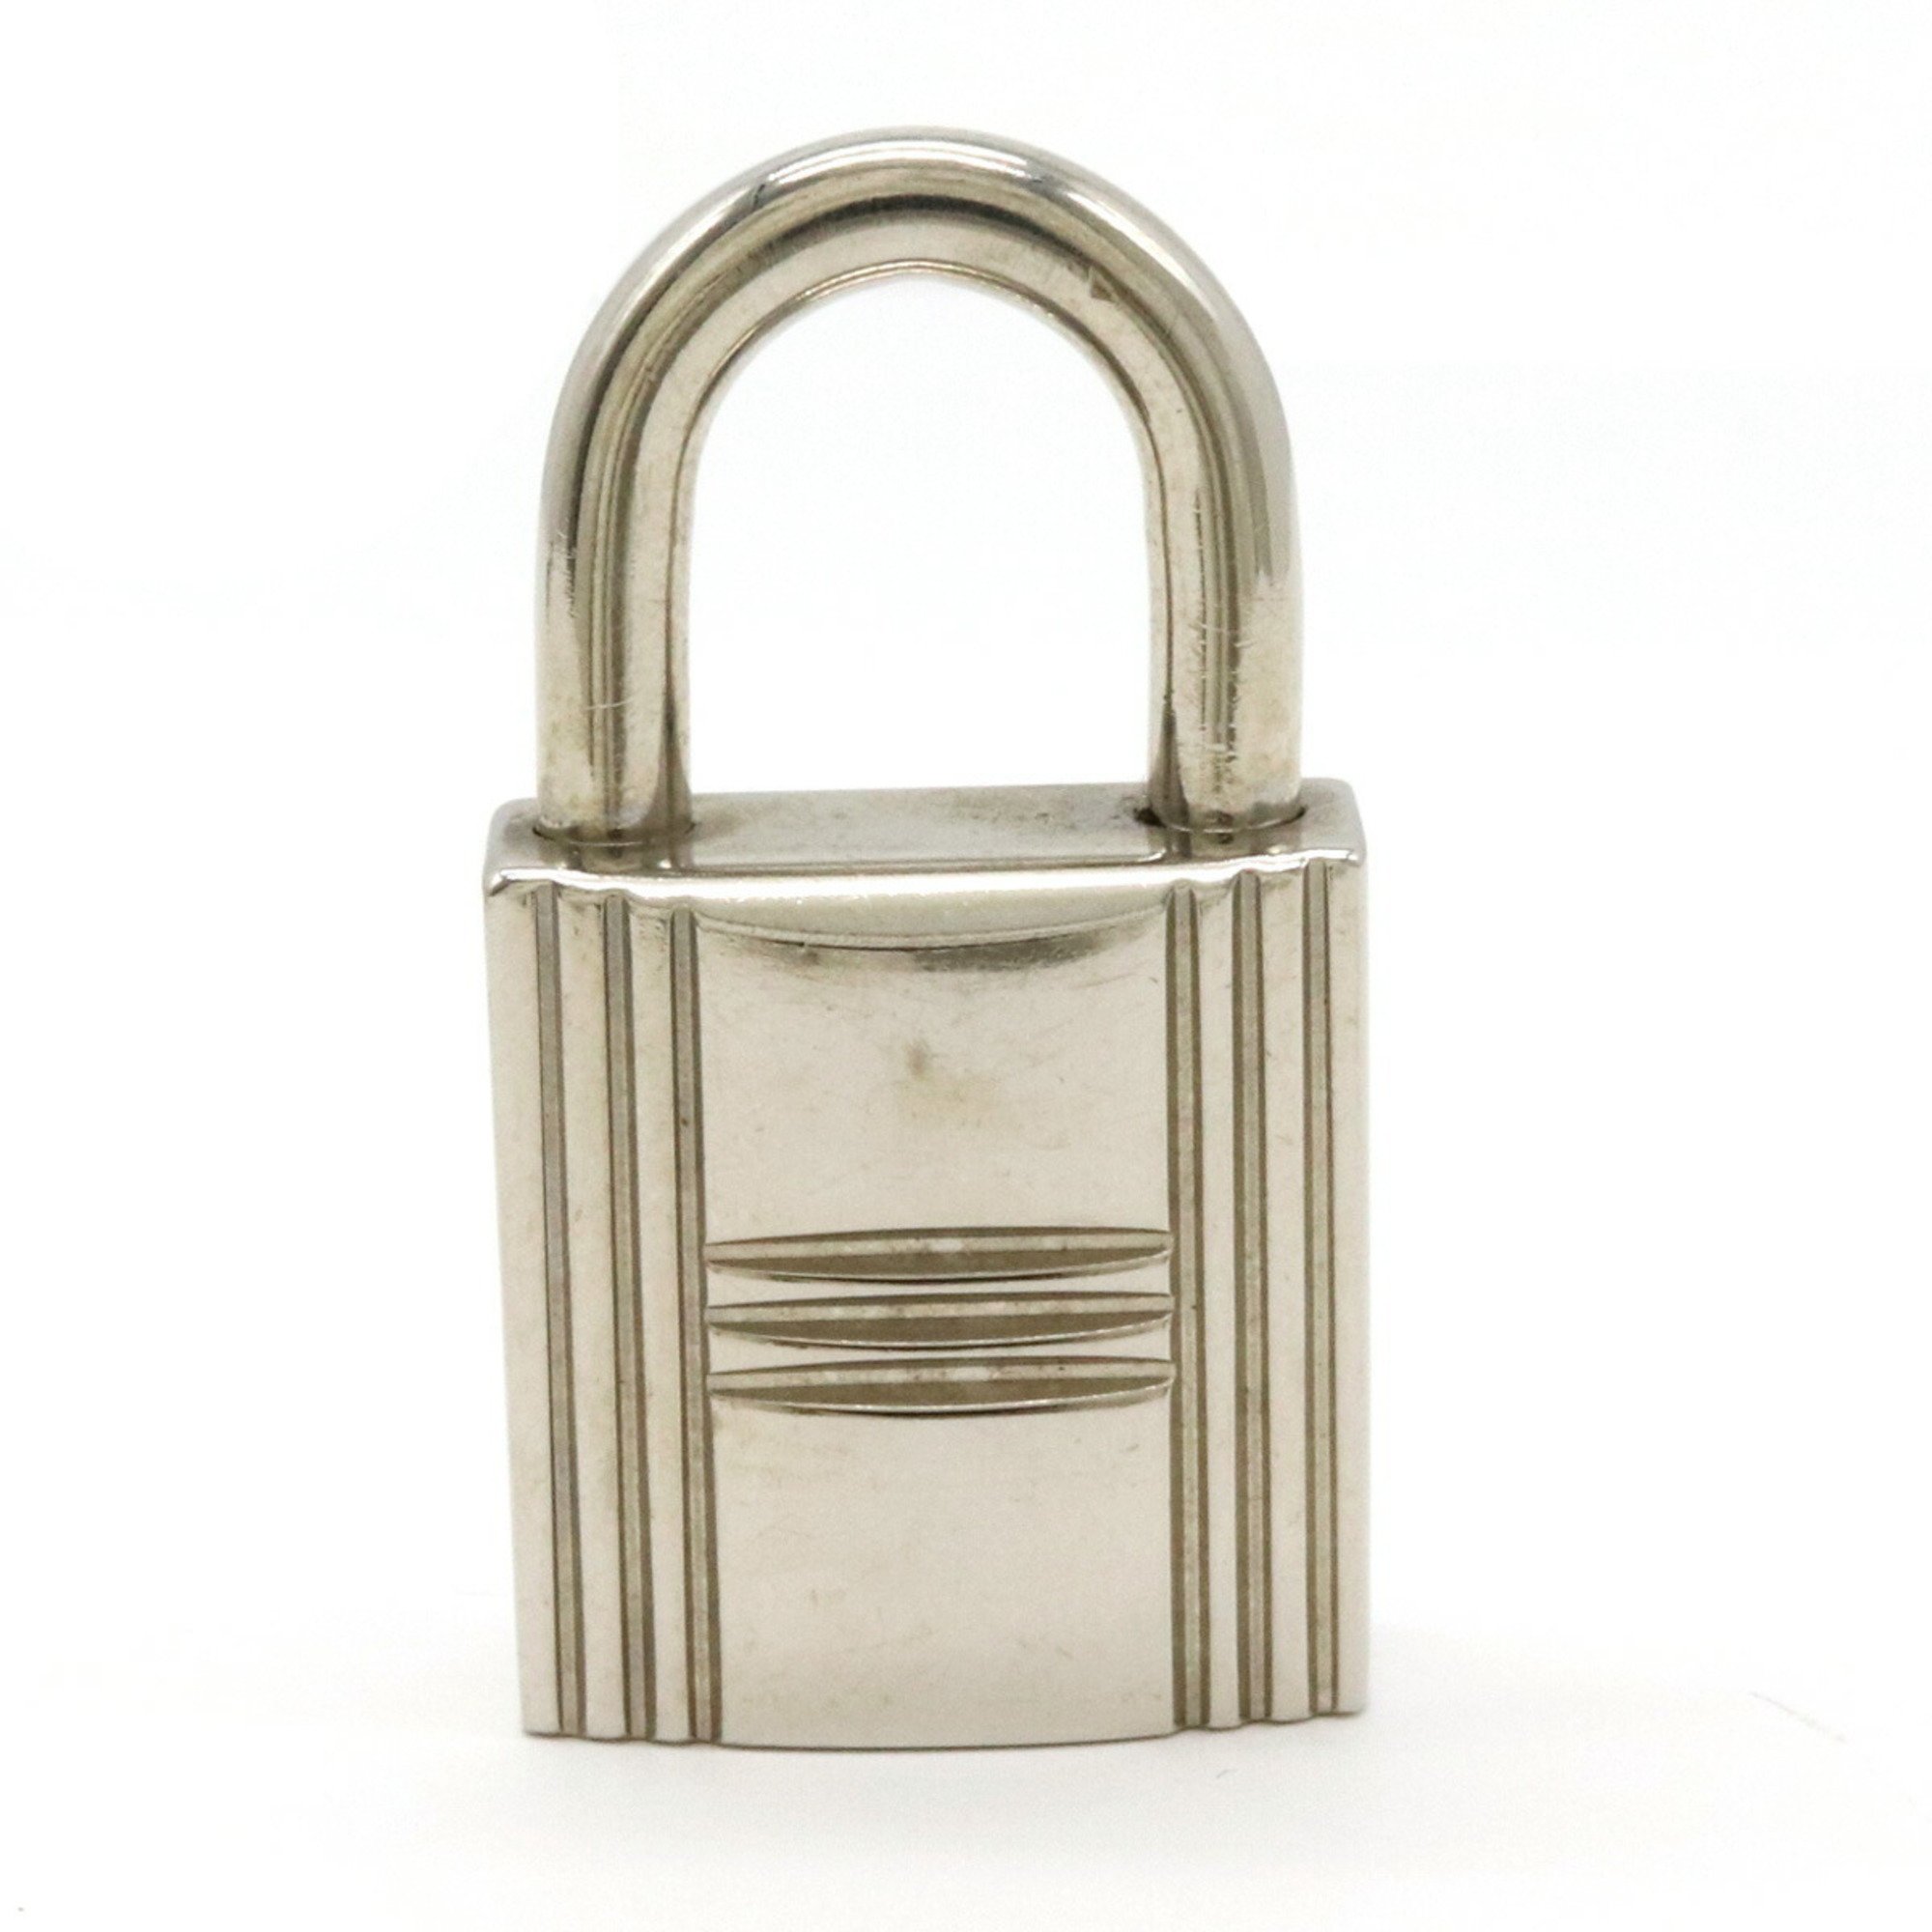 HERMES Padlock No. 100 with Key Silver Color